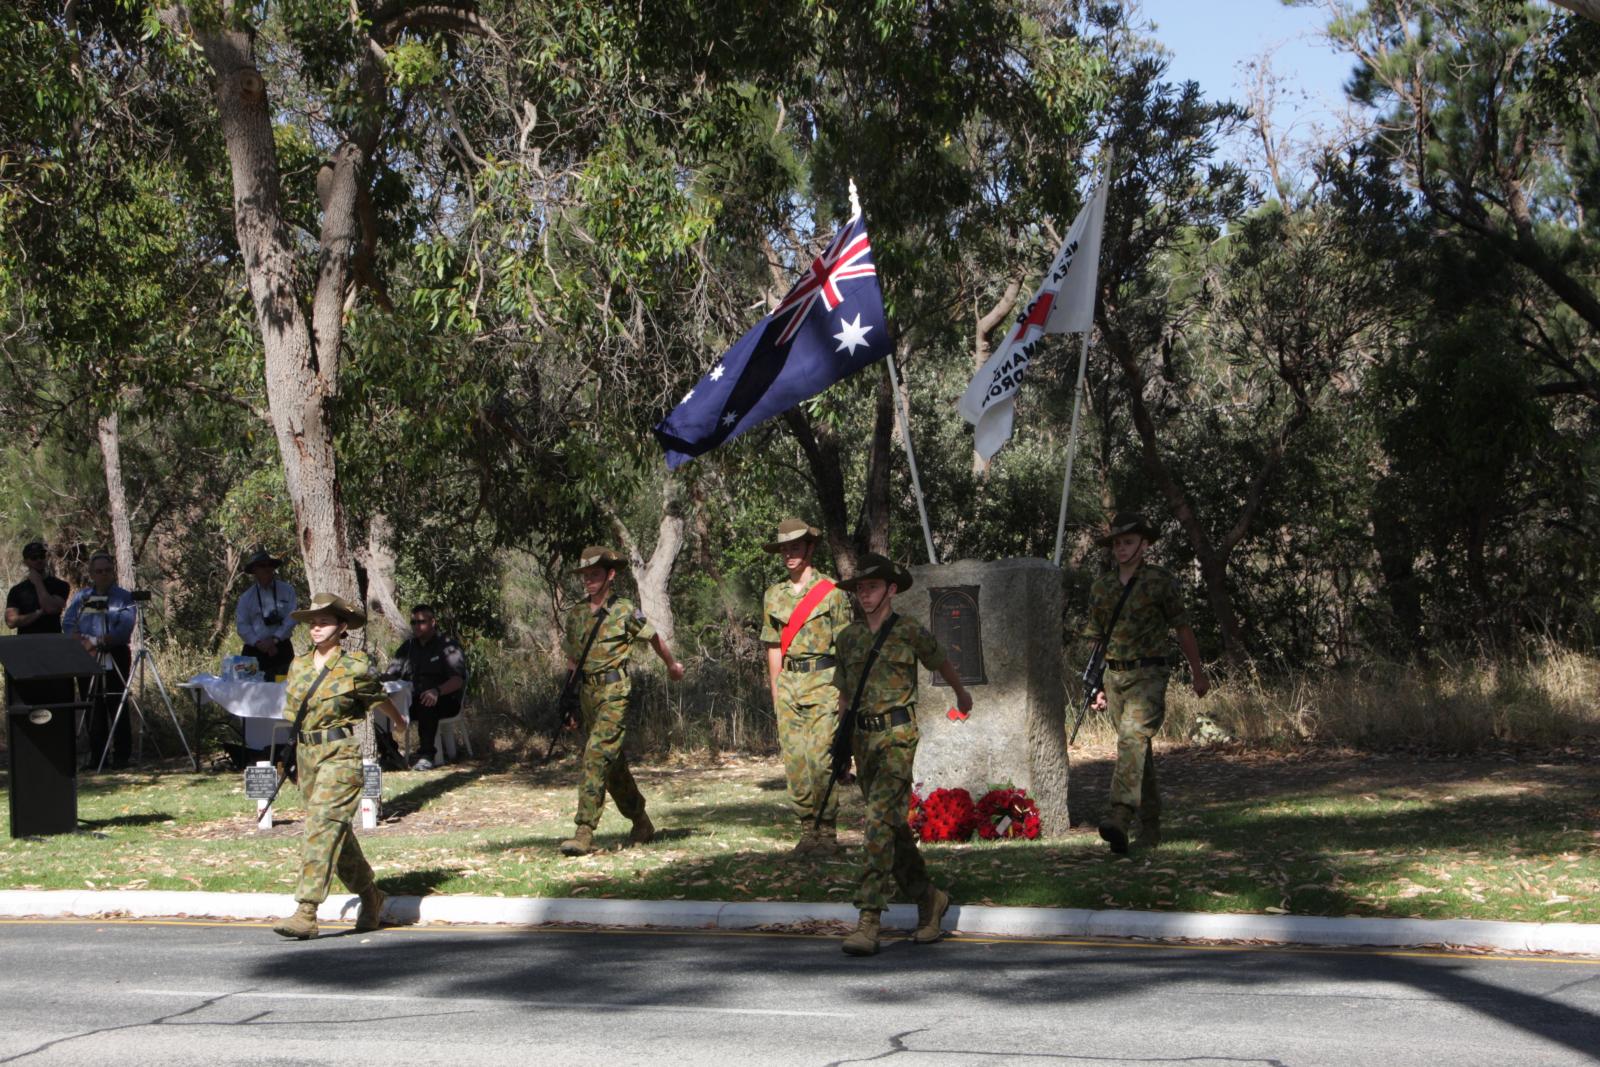 Catafalque party, comprising cadets of 53 Army Cadet Unit, Wanneroo